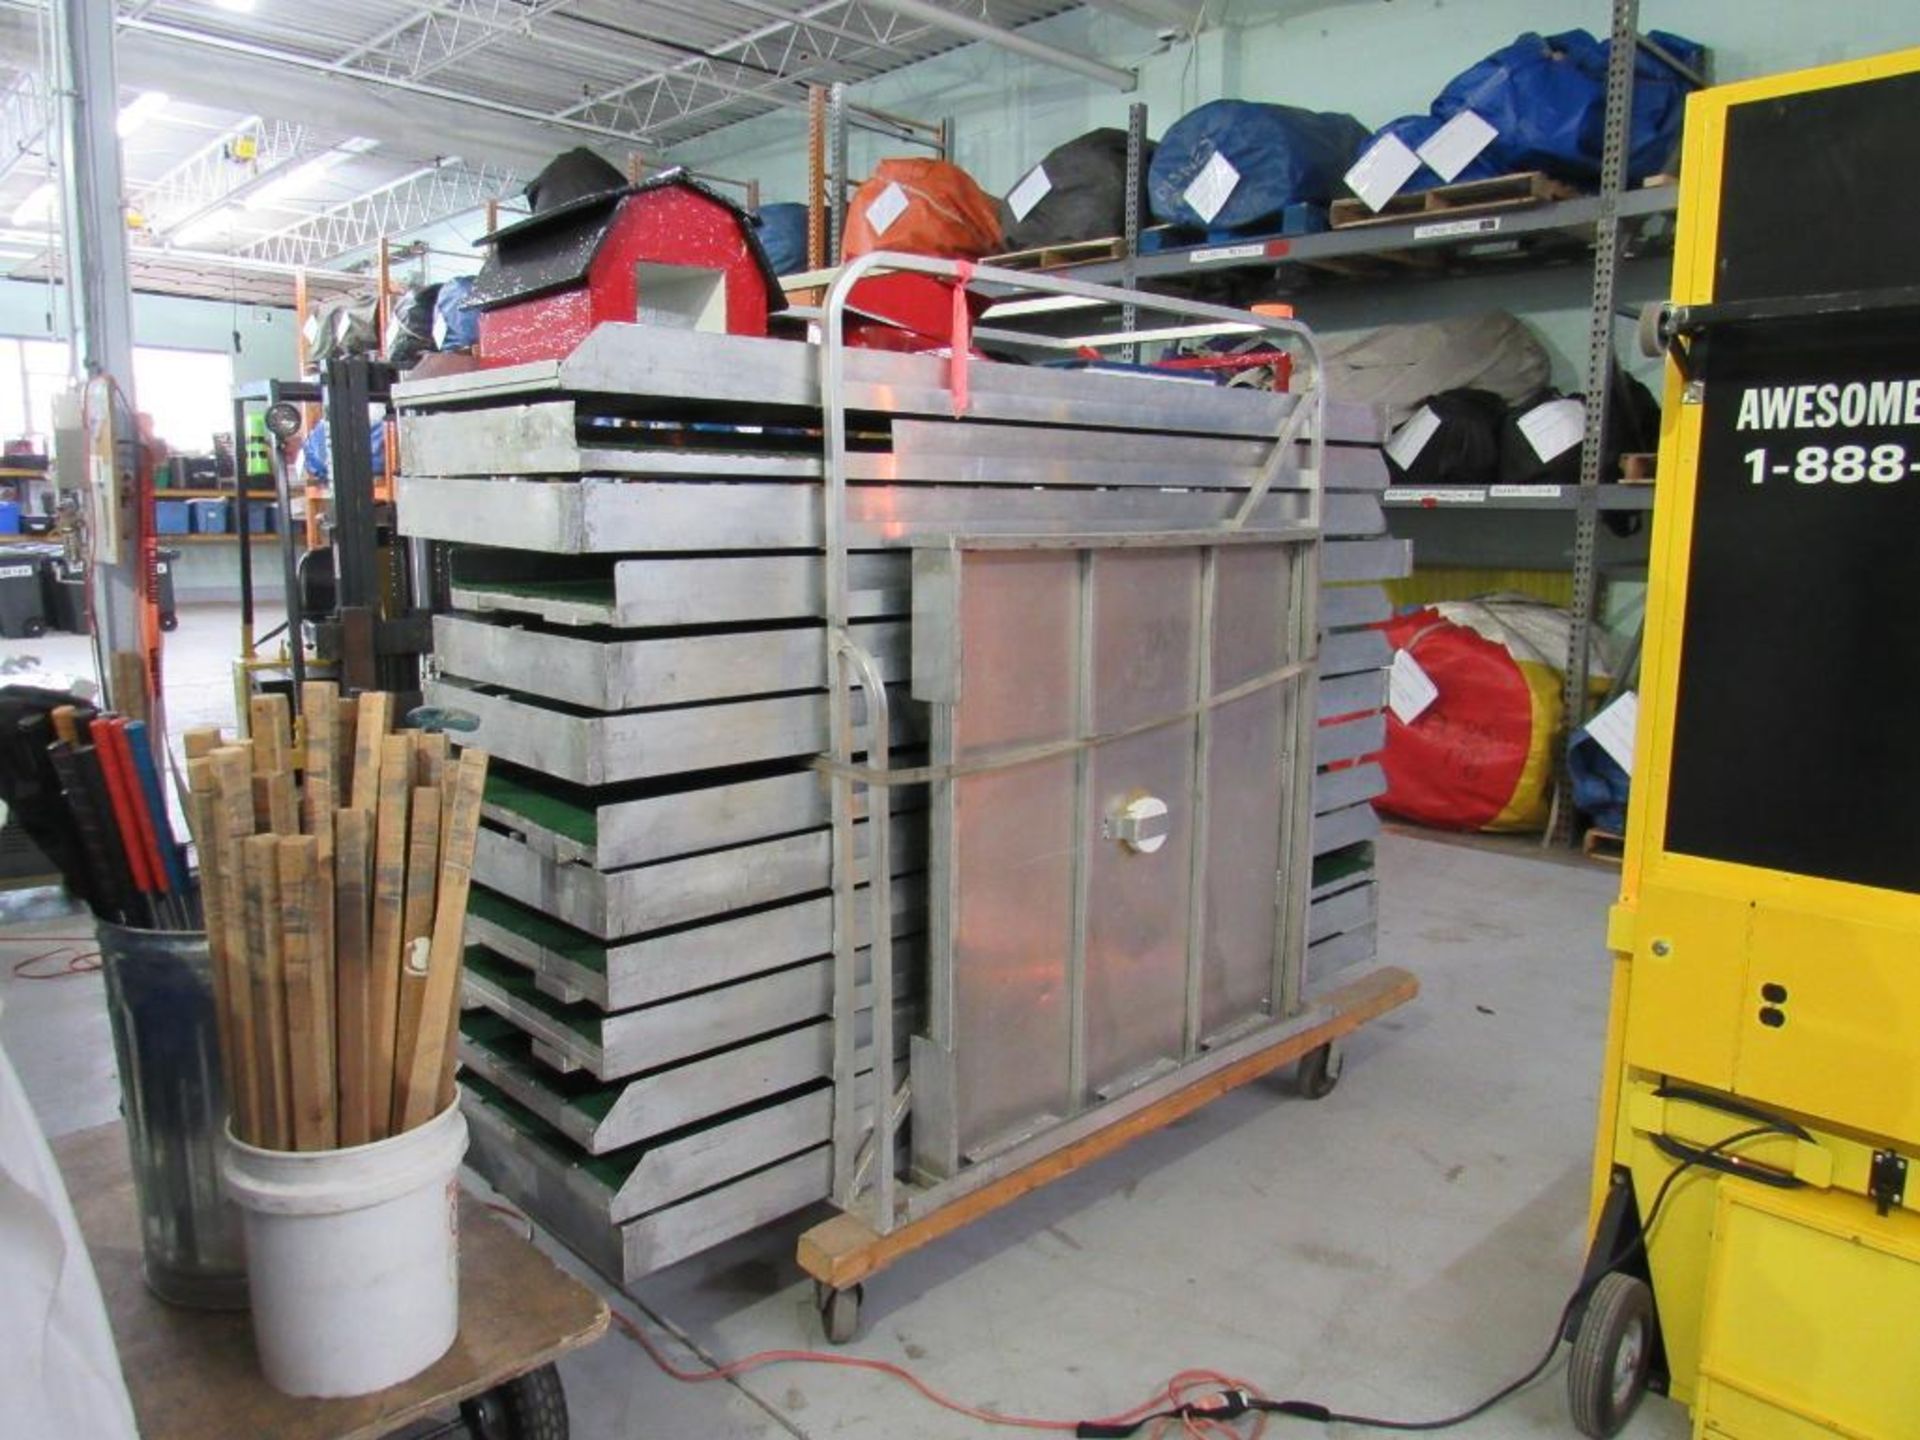 9-Hole Mini Golf System Complete with Obstacles, Putters, Golf Balls nad Storage Rack on Wheels - Image 5 of 6